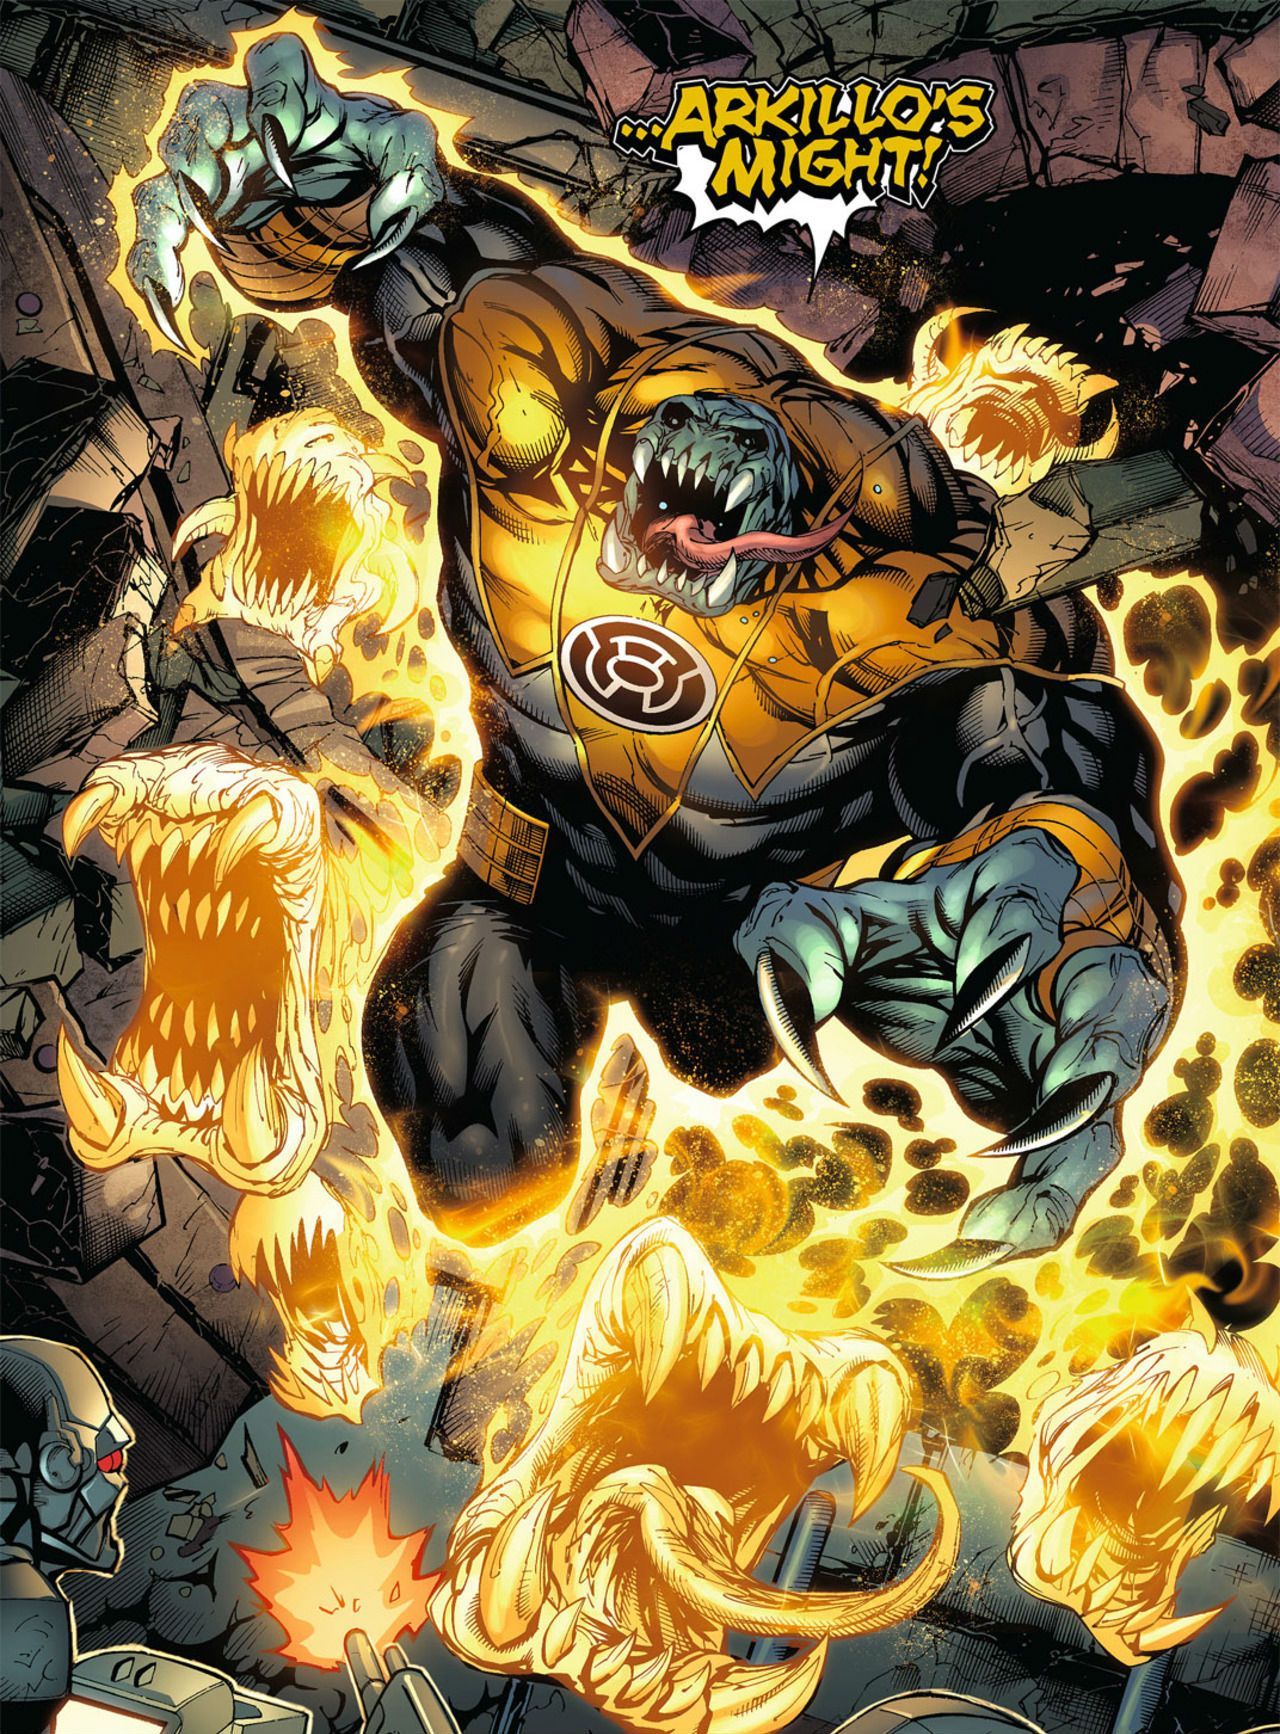 Fact arkillo whas the first ever yellow lantern recruit. Yellow lantern, Comics, Green lantern corps